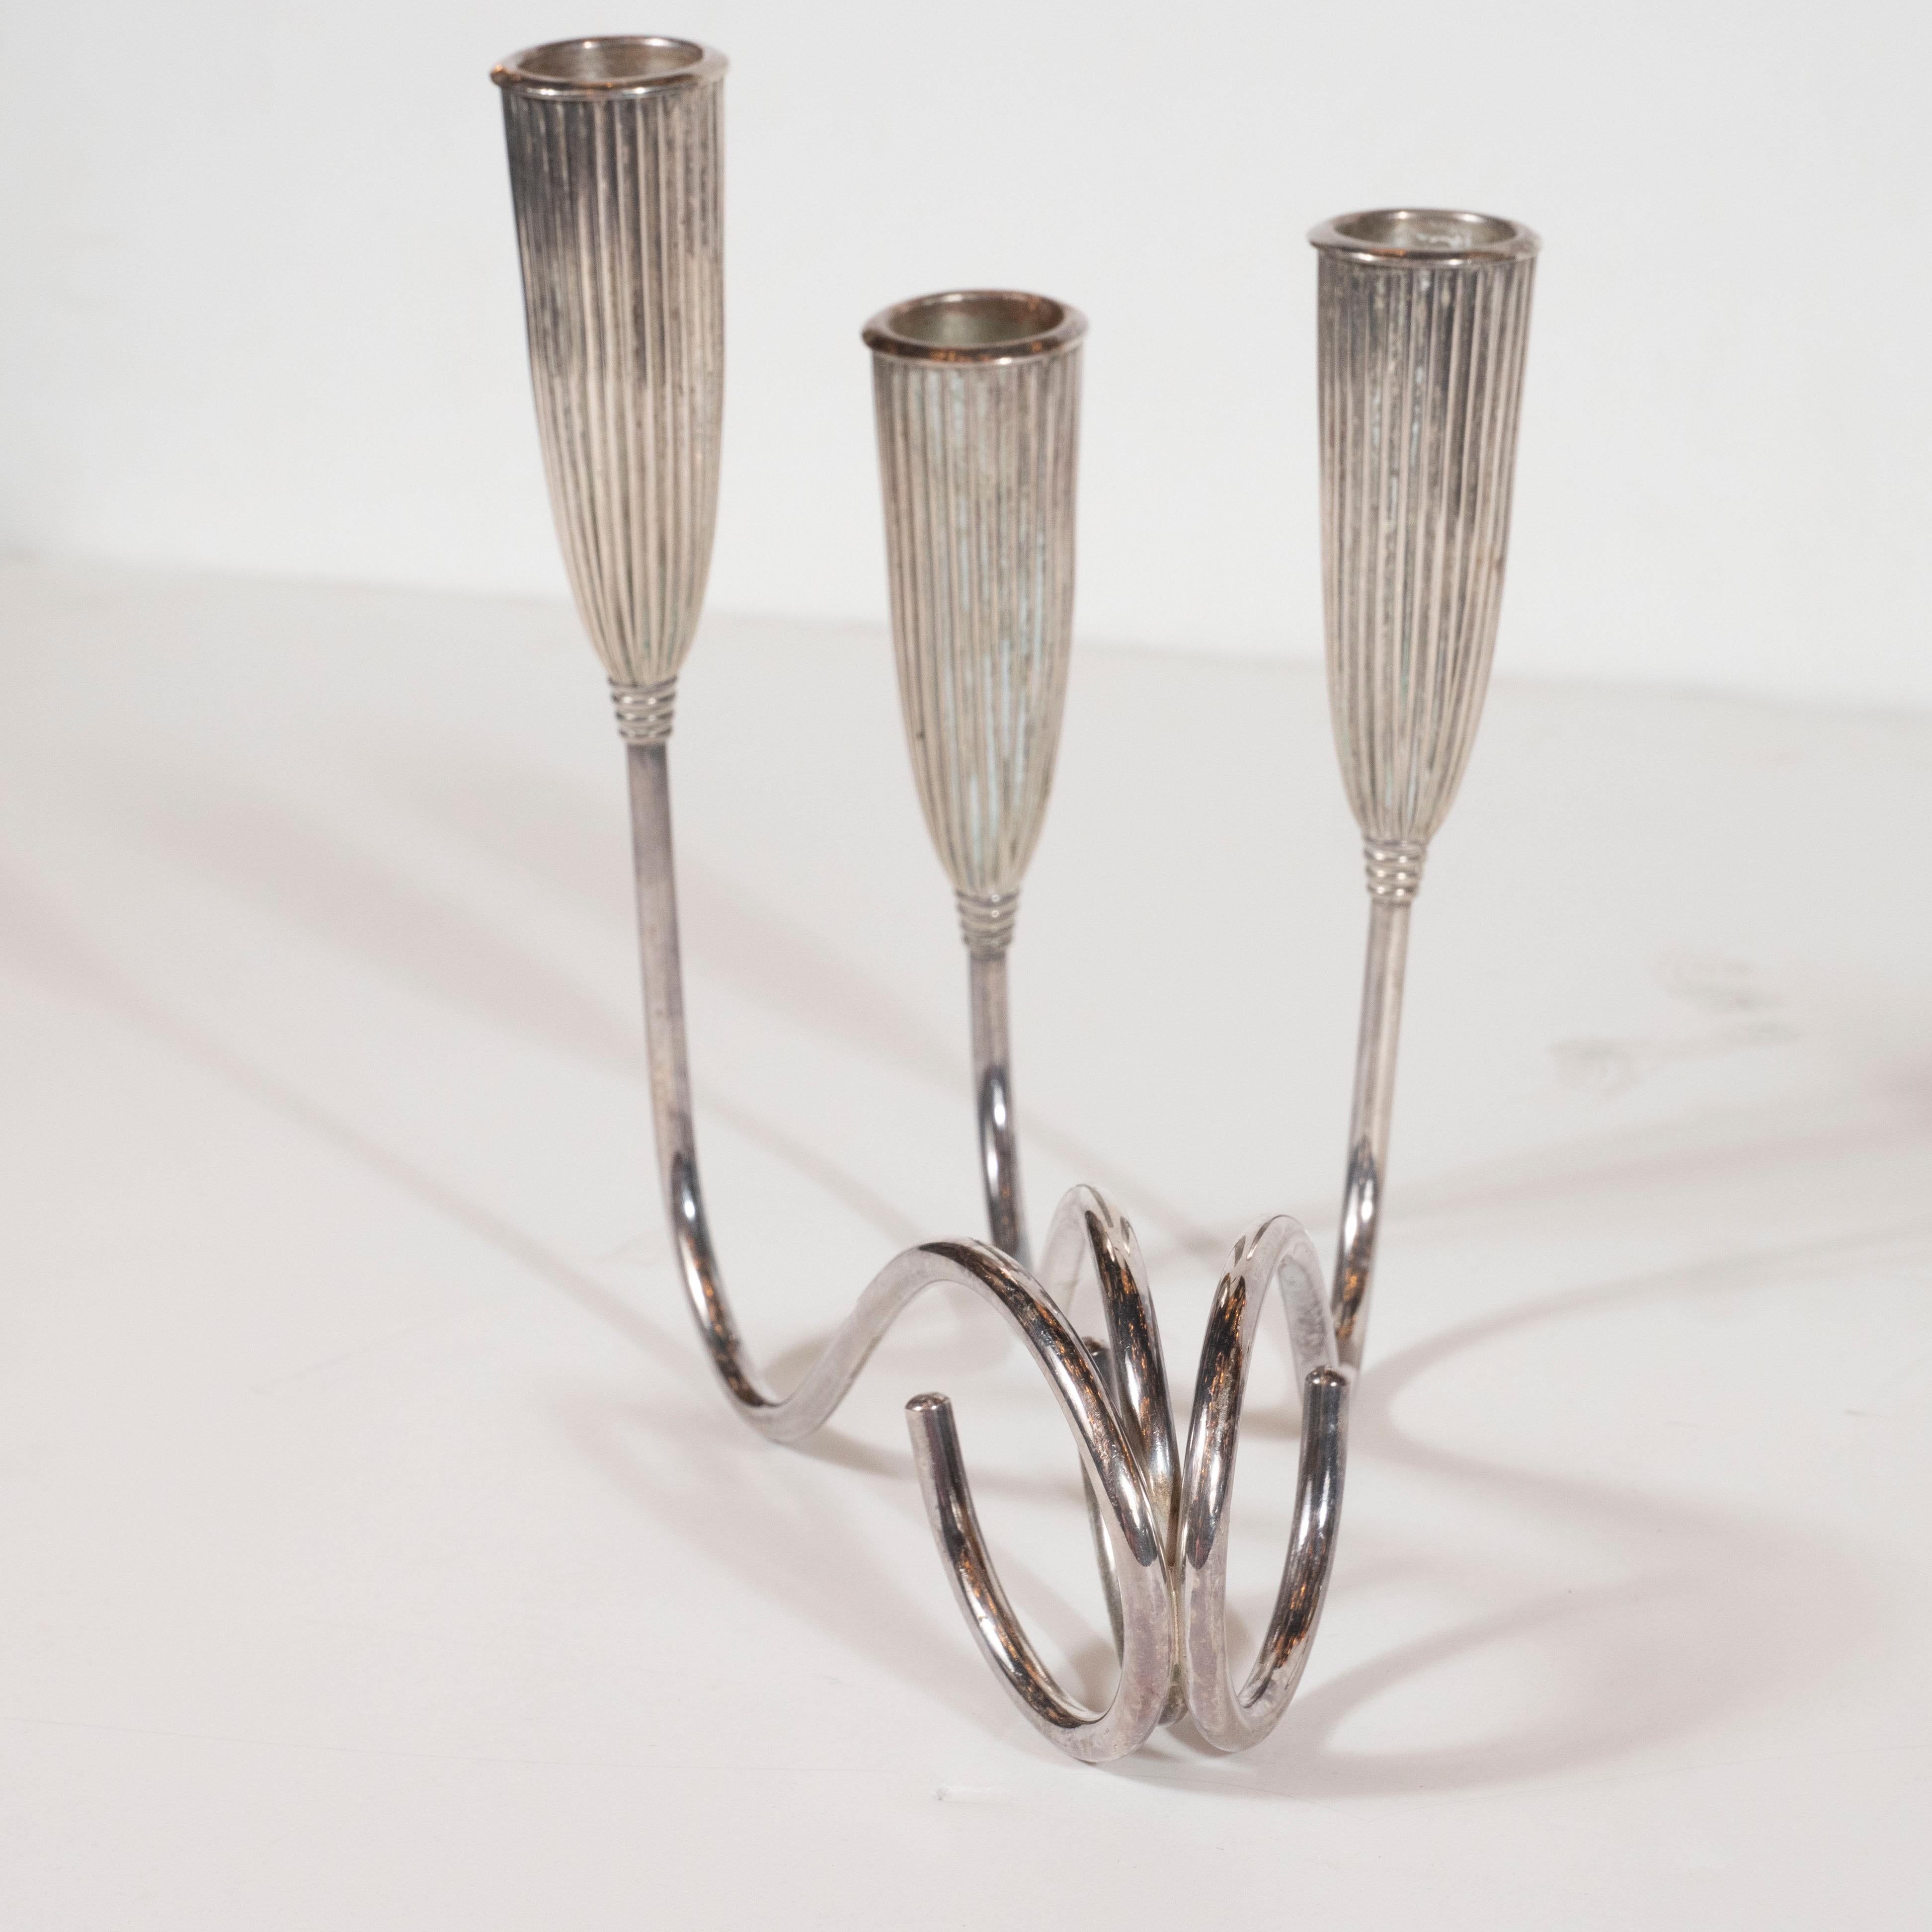 Pair of Art Deco Triple Branch Fluted Silver Plated Candlesticks by Napier 1